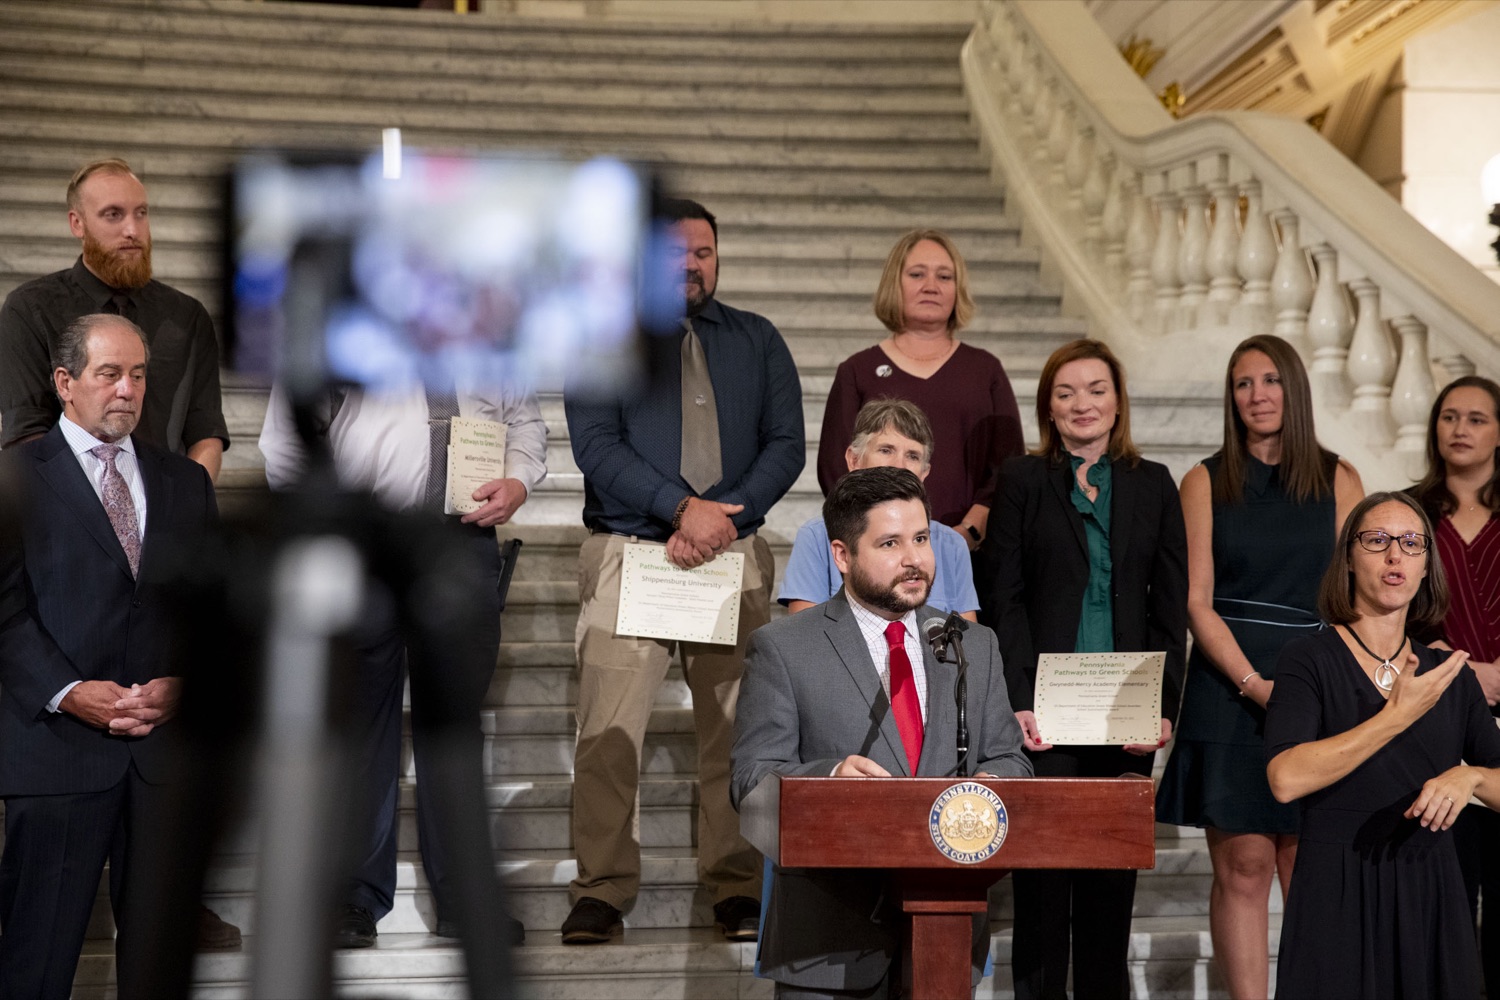 Eric Hagarty, Department of Education Acting Secretary, applauds schools for helping students engage in environmental sustainability practices, in Harrisburg, PA on September 20, 2022.<br><a href="https://filesource.amperwave.net/commonwealthofpa/photo/22151_dcnr_pathways_cz_09.jpg" target="_blank">⇣ Download Photo</a>